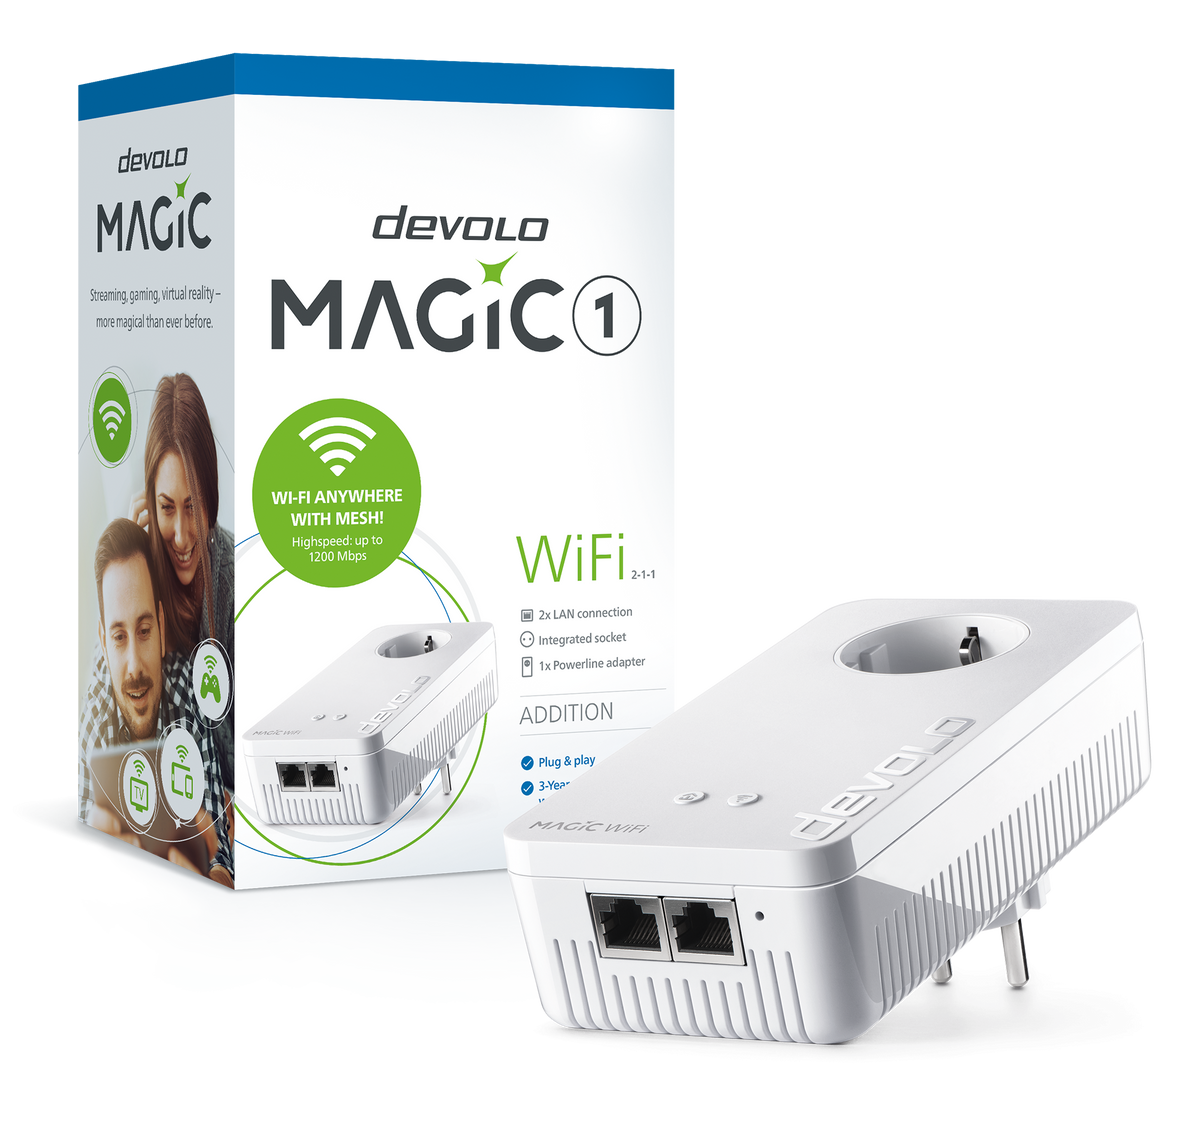 devolo Magic 1 WiFi,Additional adapter,Speed. PLC up to 1200Mbps, Wi-Fi mesh w/ 2 LAN Ports- PT8358